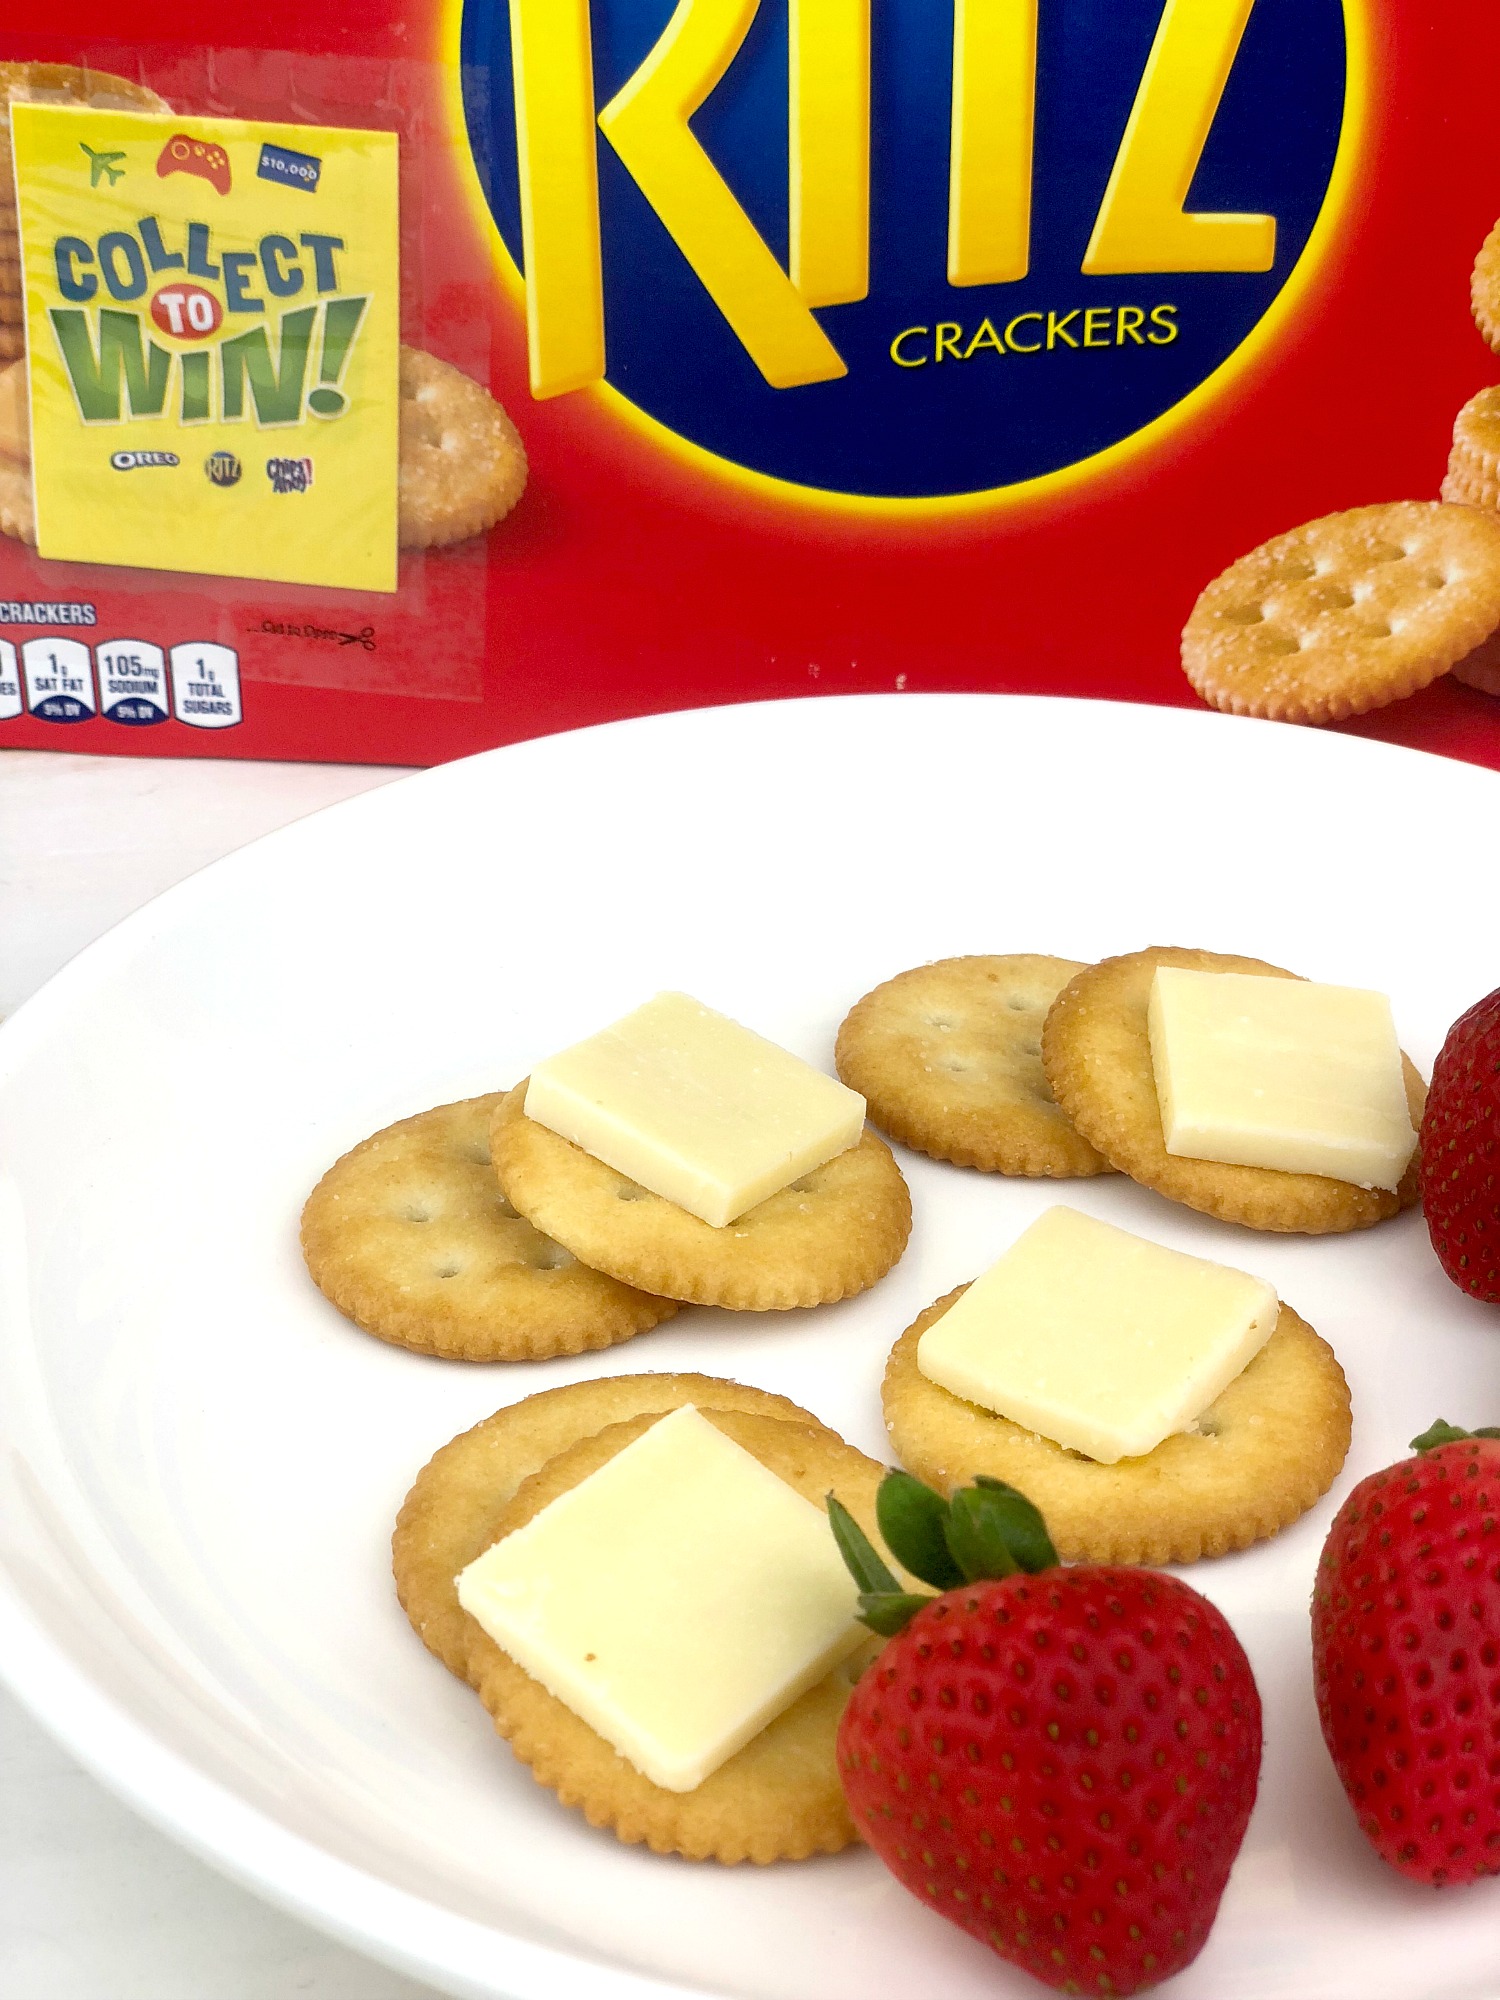 RITZ crackers with cheese